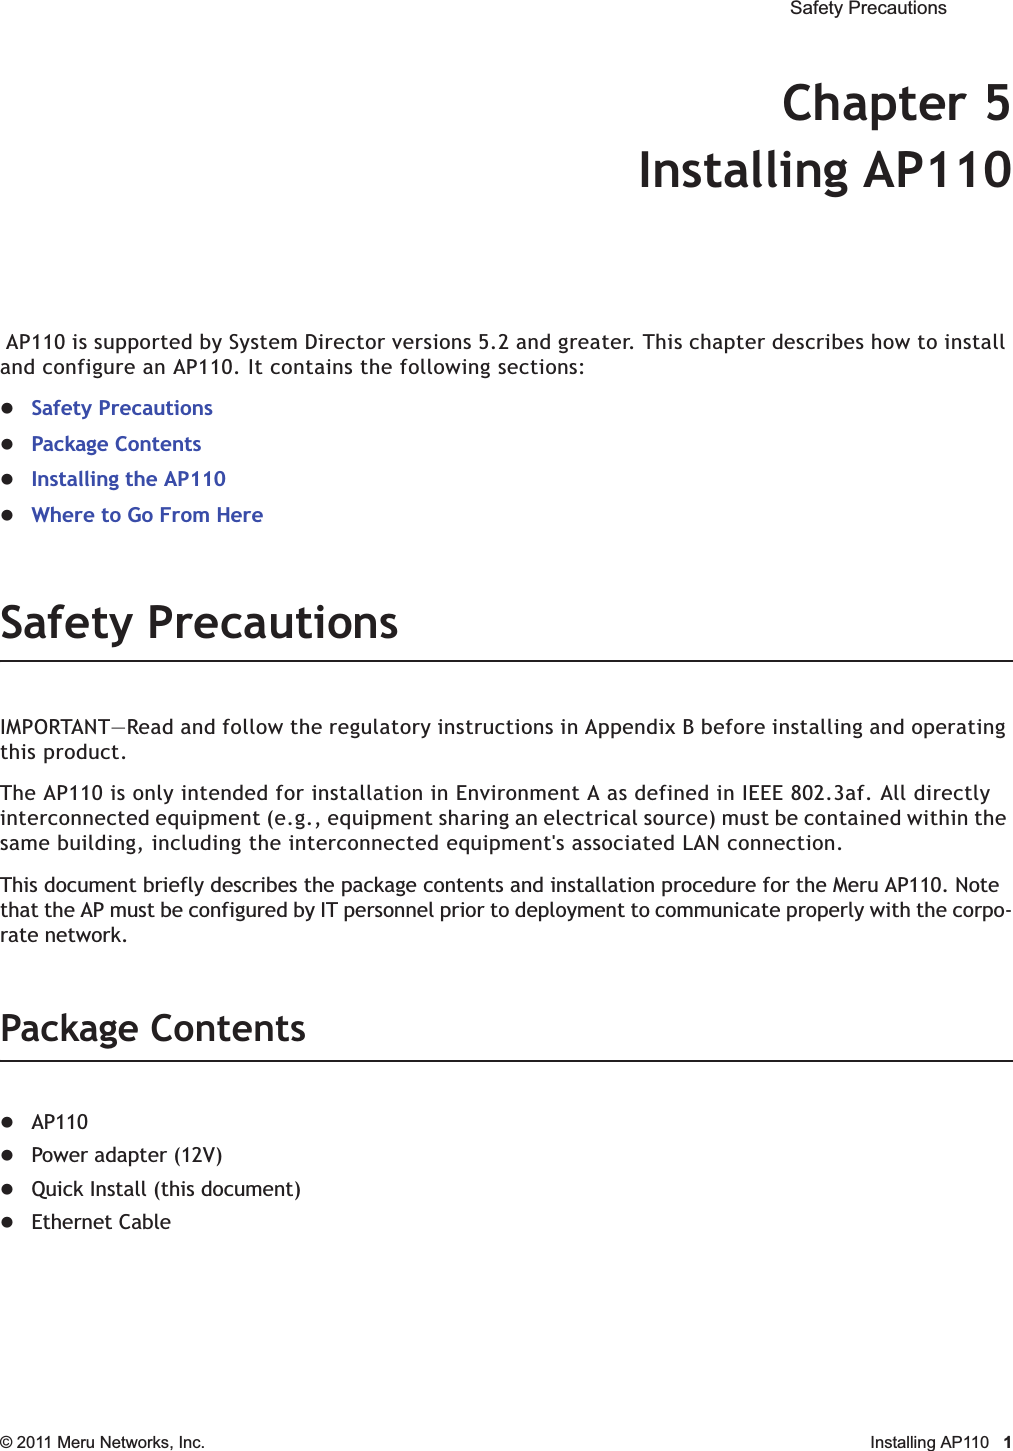  Safety Precautions © 2011 Meru Networks, Inc. Installing AP110 1Chapter 5Installing AP110 AP110 is supported by System Director versions 5.2 and greater. This chapter describes how to install and configure an AP110. It contains the following sections:zSafety PrecautionszPackage ContentszInstalling the AP110zWhere to Go From HereSafety PrecautionsIMPORTANT—Read and follow the regulatory instructions in Appendix B before installing and operating this product.The AP110 is only intended for installation in Environment A as defined in IEEE 802.3af. All directly interconnected equipment (e.g., equipment sharing an electrical source) must be contained within the same building, including the interconnected equipment&apos;s associated LAN connection.This document briefly describes the package contents and installation procedure for the Meru AP110. Note that the AP must be configured by IT personnel prior to deployment to communicate properly with the corpo-rate network.Package ContentszAP110zPower adapter (12V)zQuick Install (this document)zEthernet Cable